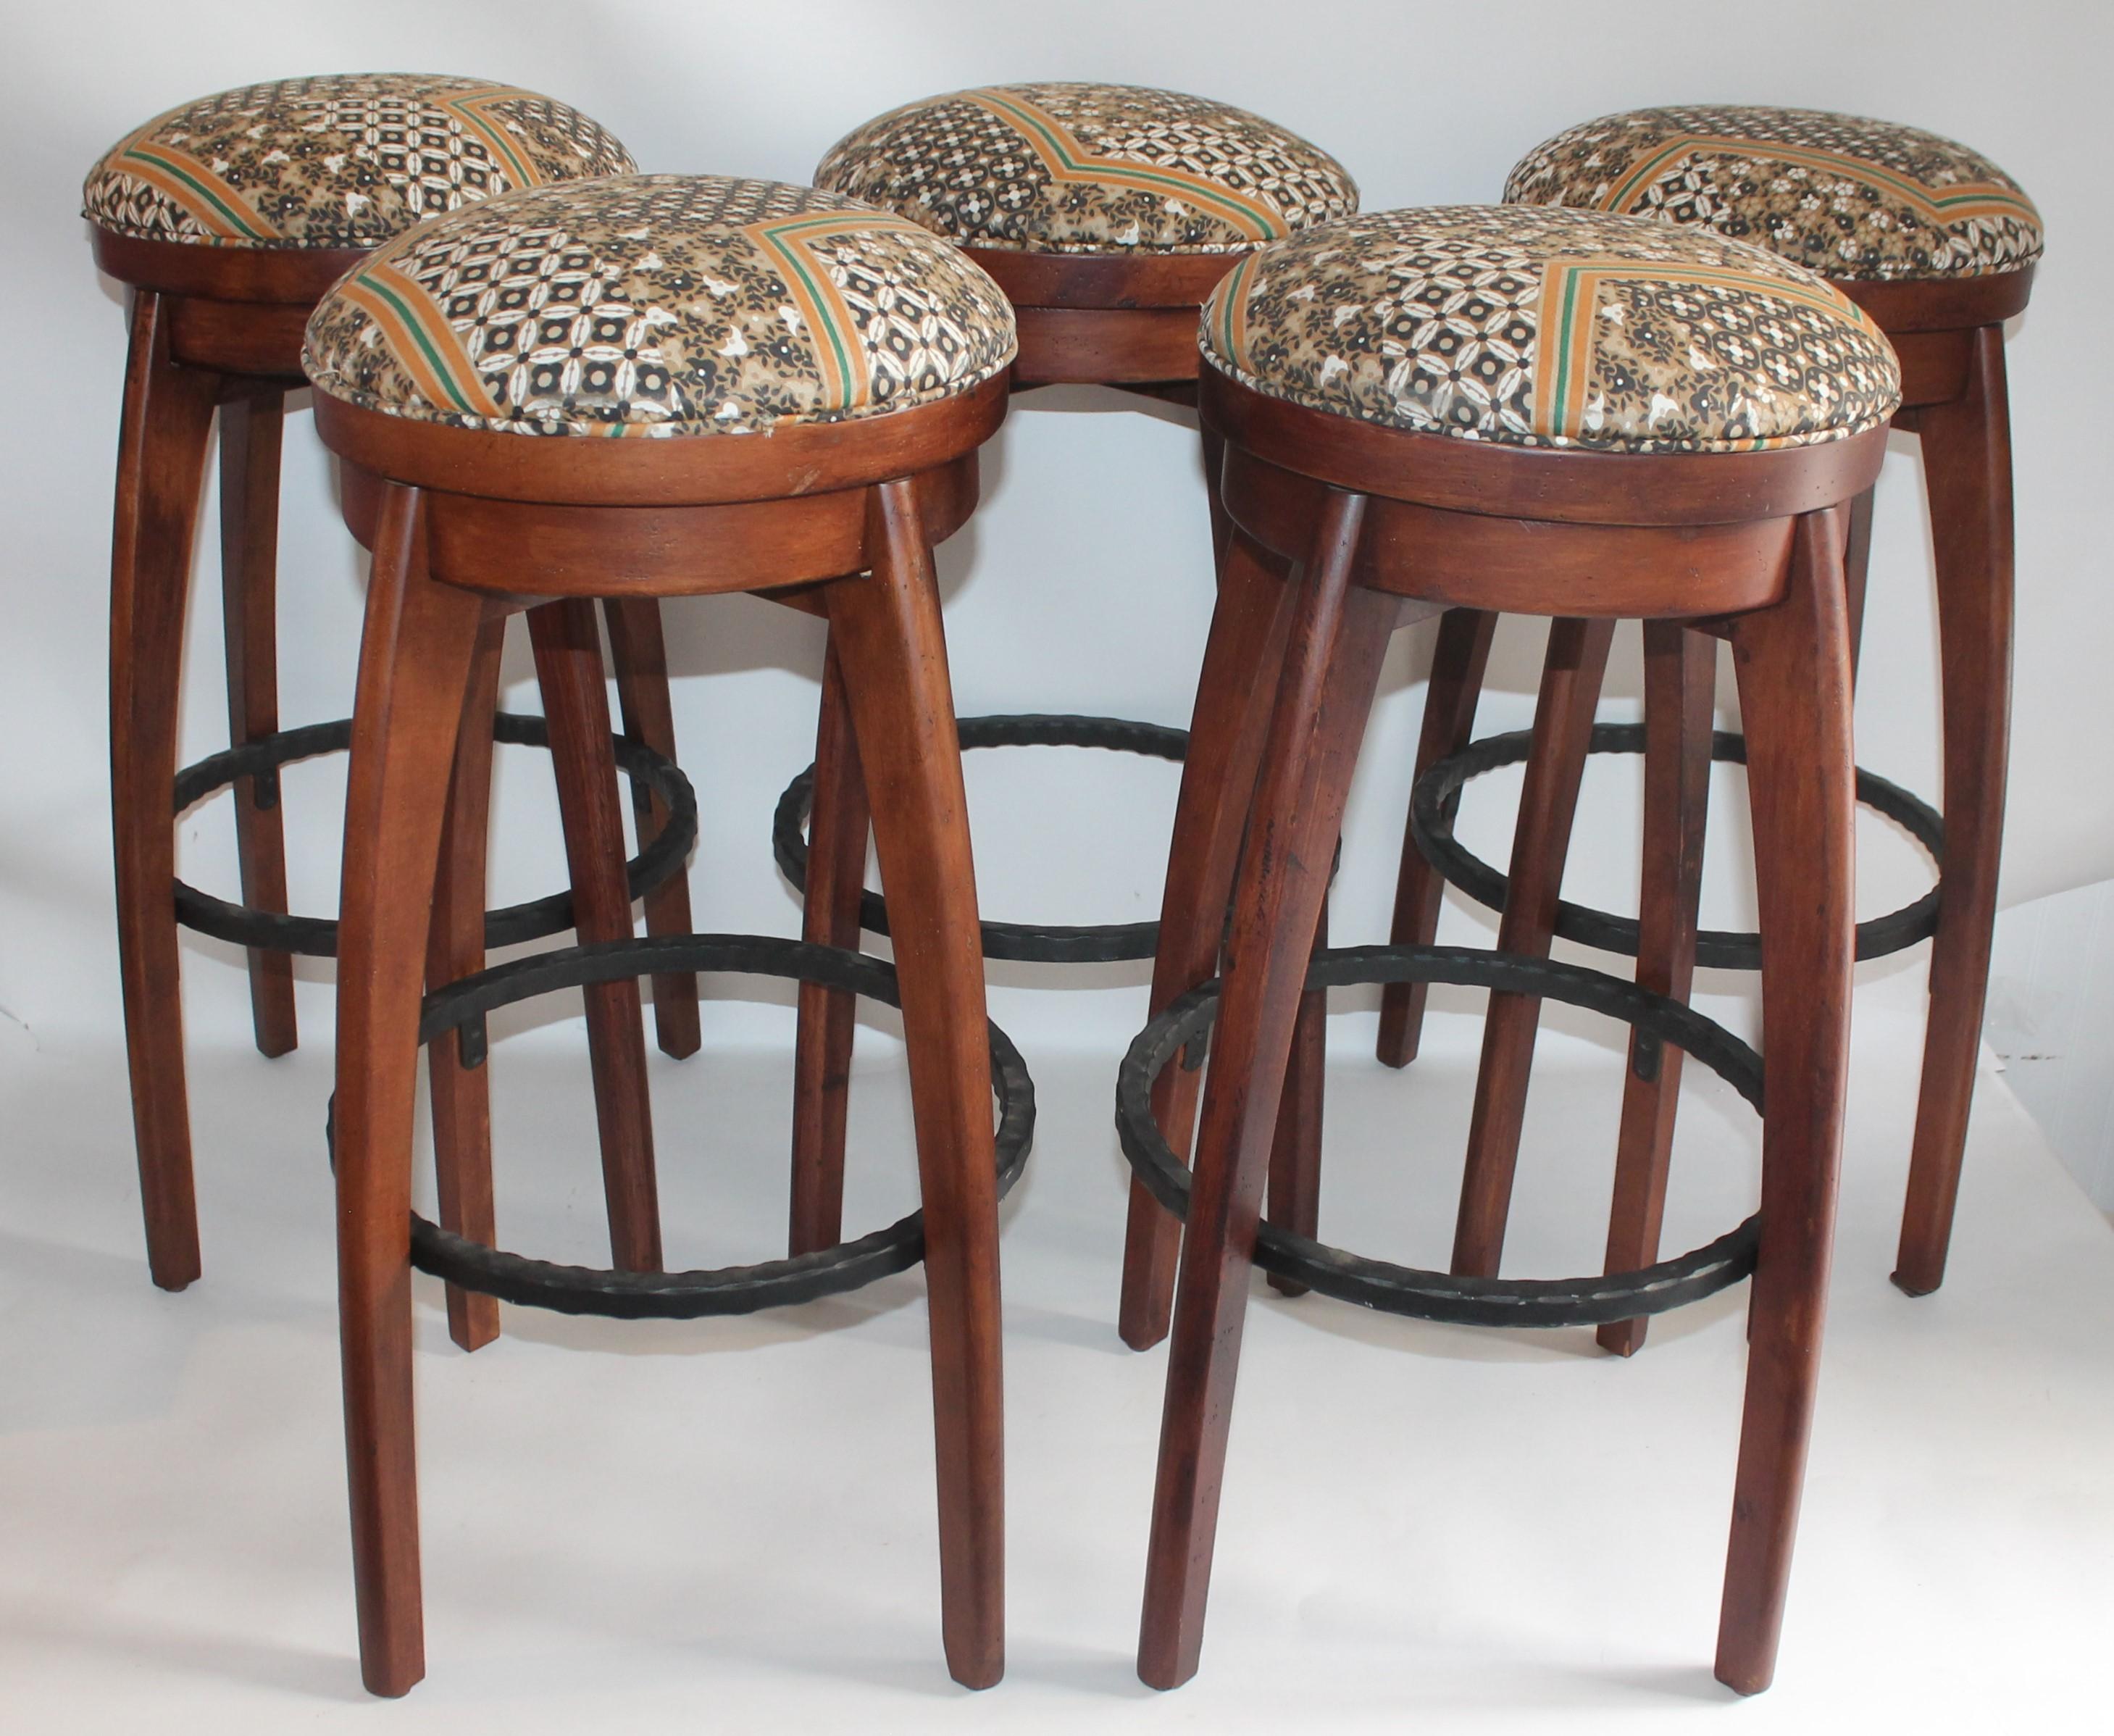 These amazing rustic and very comfortable swivel bar stools are in fine condition. The tribal modern printed fabric on the seats are in good condition as well. These stools swivel and have a iron foot rest.